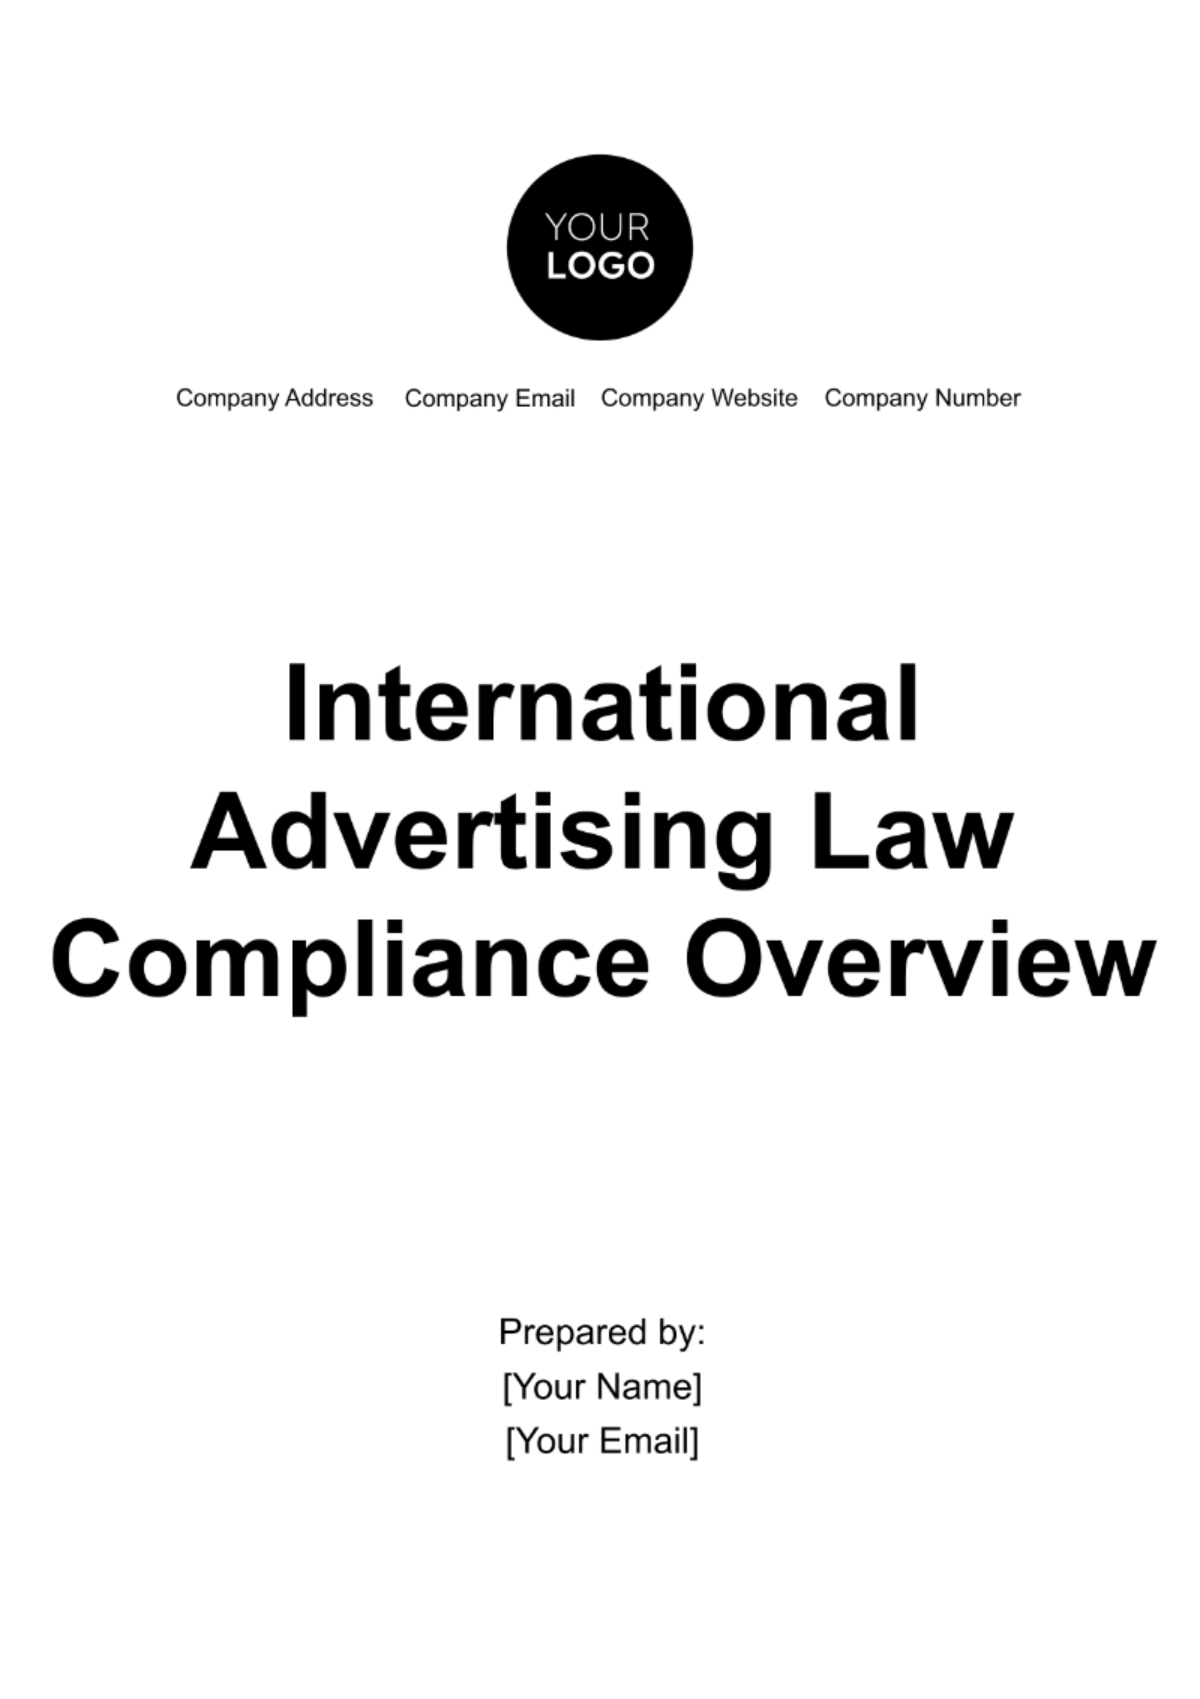 Free International Advertising Law Compliance Overview Template